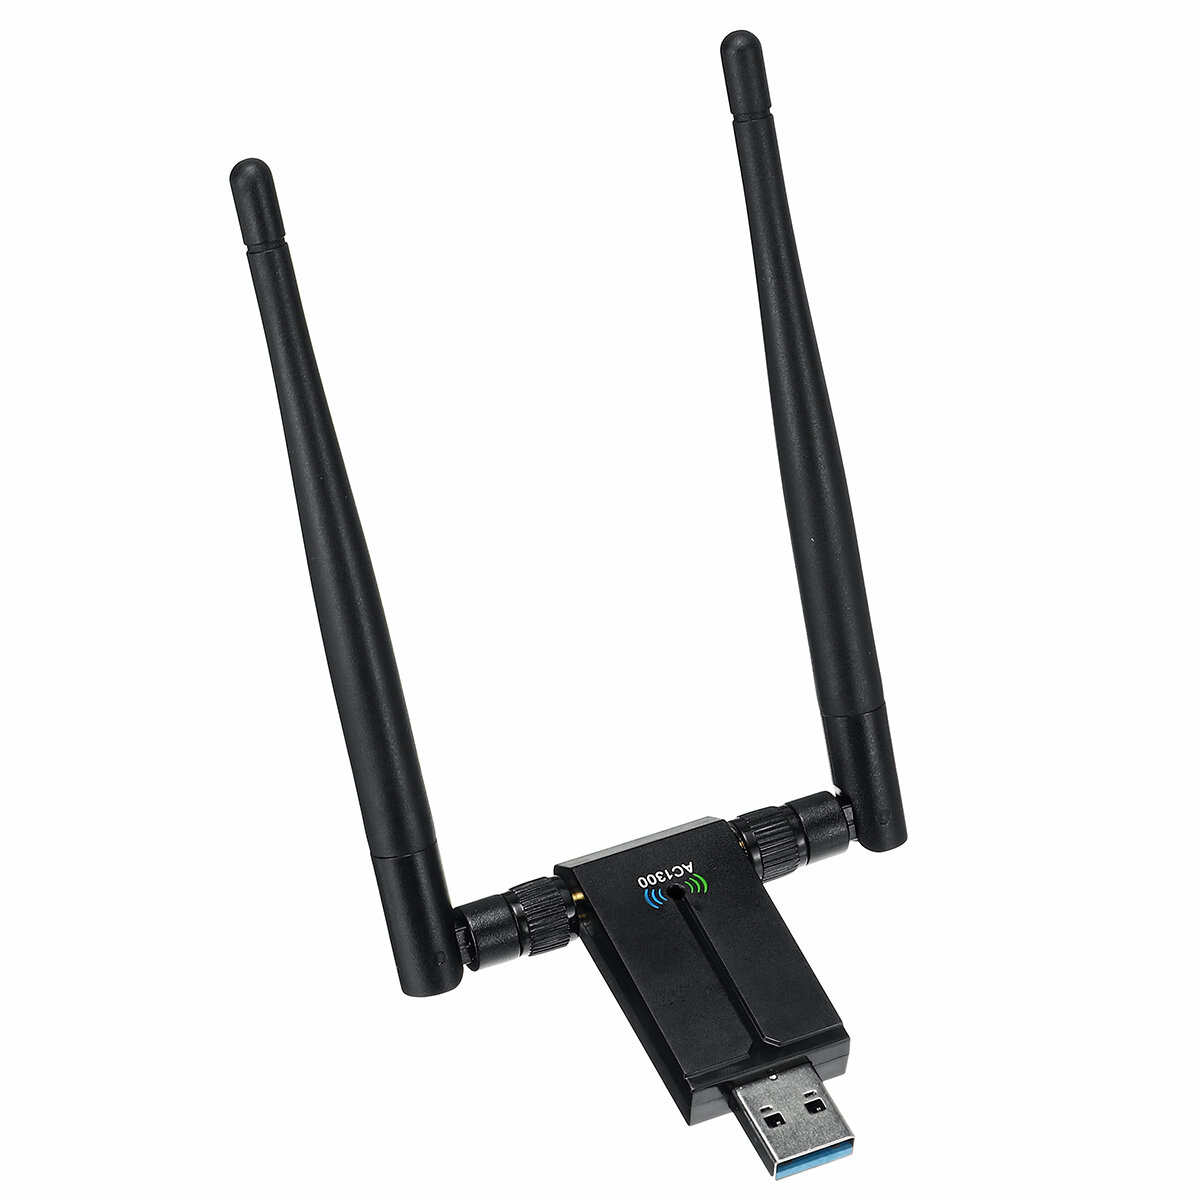 

1300M Wireless Network Card USB3.0 Wifi Adapter Dual-band 2.4G/5G 1300Mbps W/Antenna Through the Wall Gigabit Network Ca